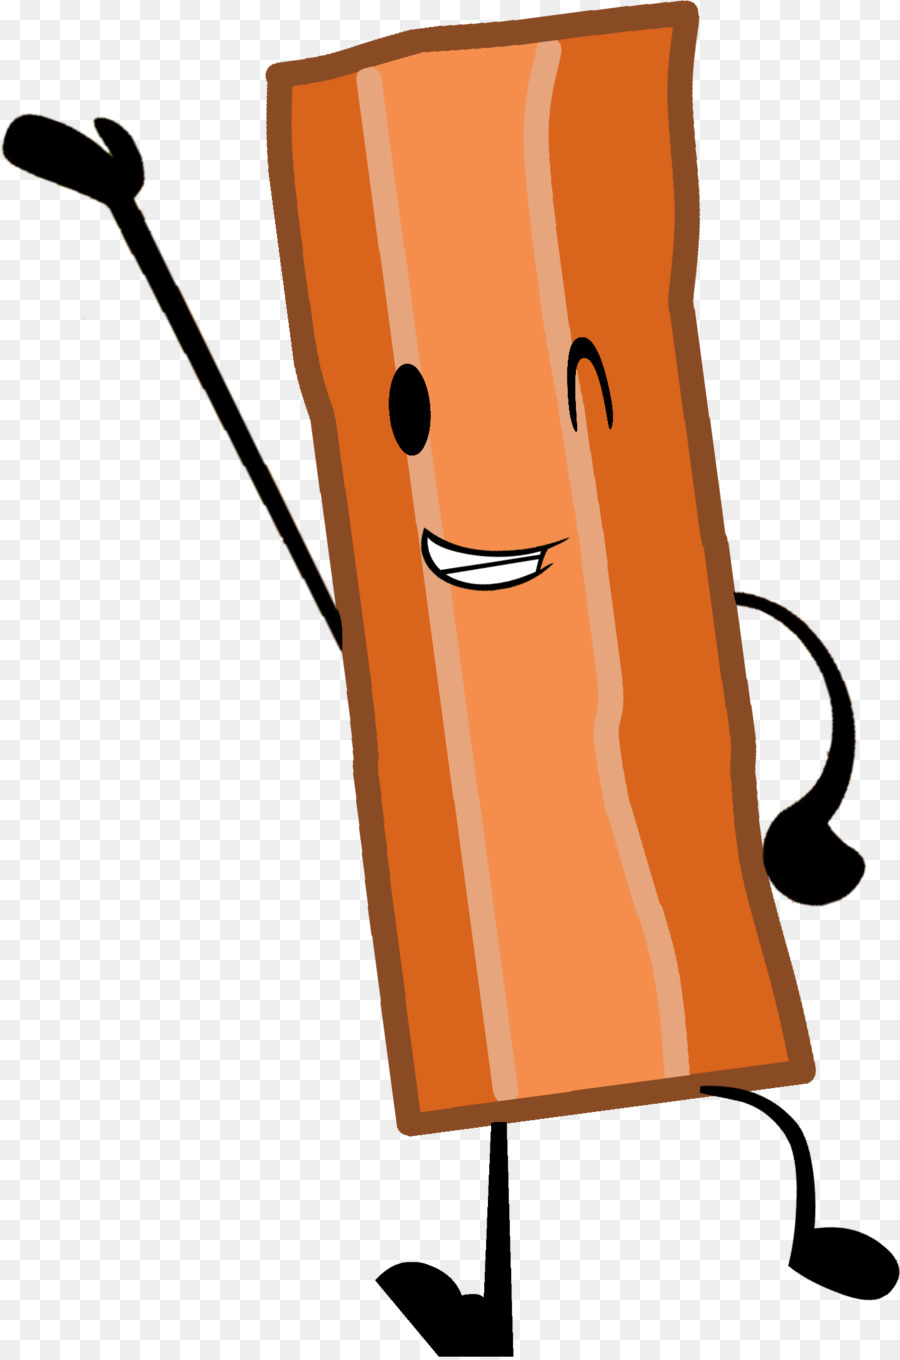 Bacon Soup Clip art - bacon png download - 1433*2160 - Free Transparent Bacon png Download.